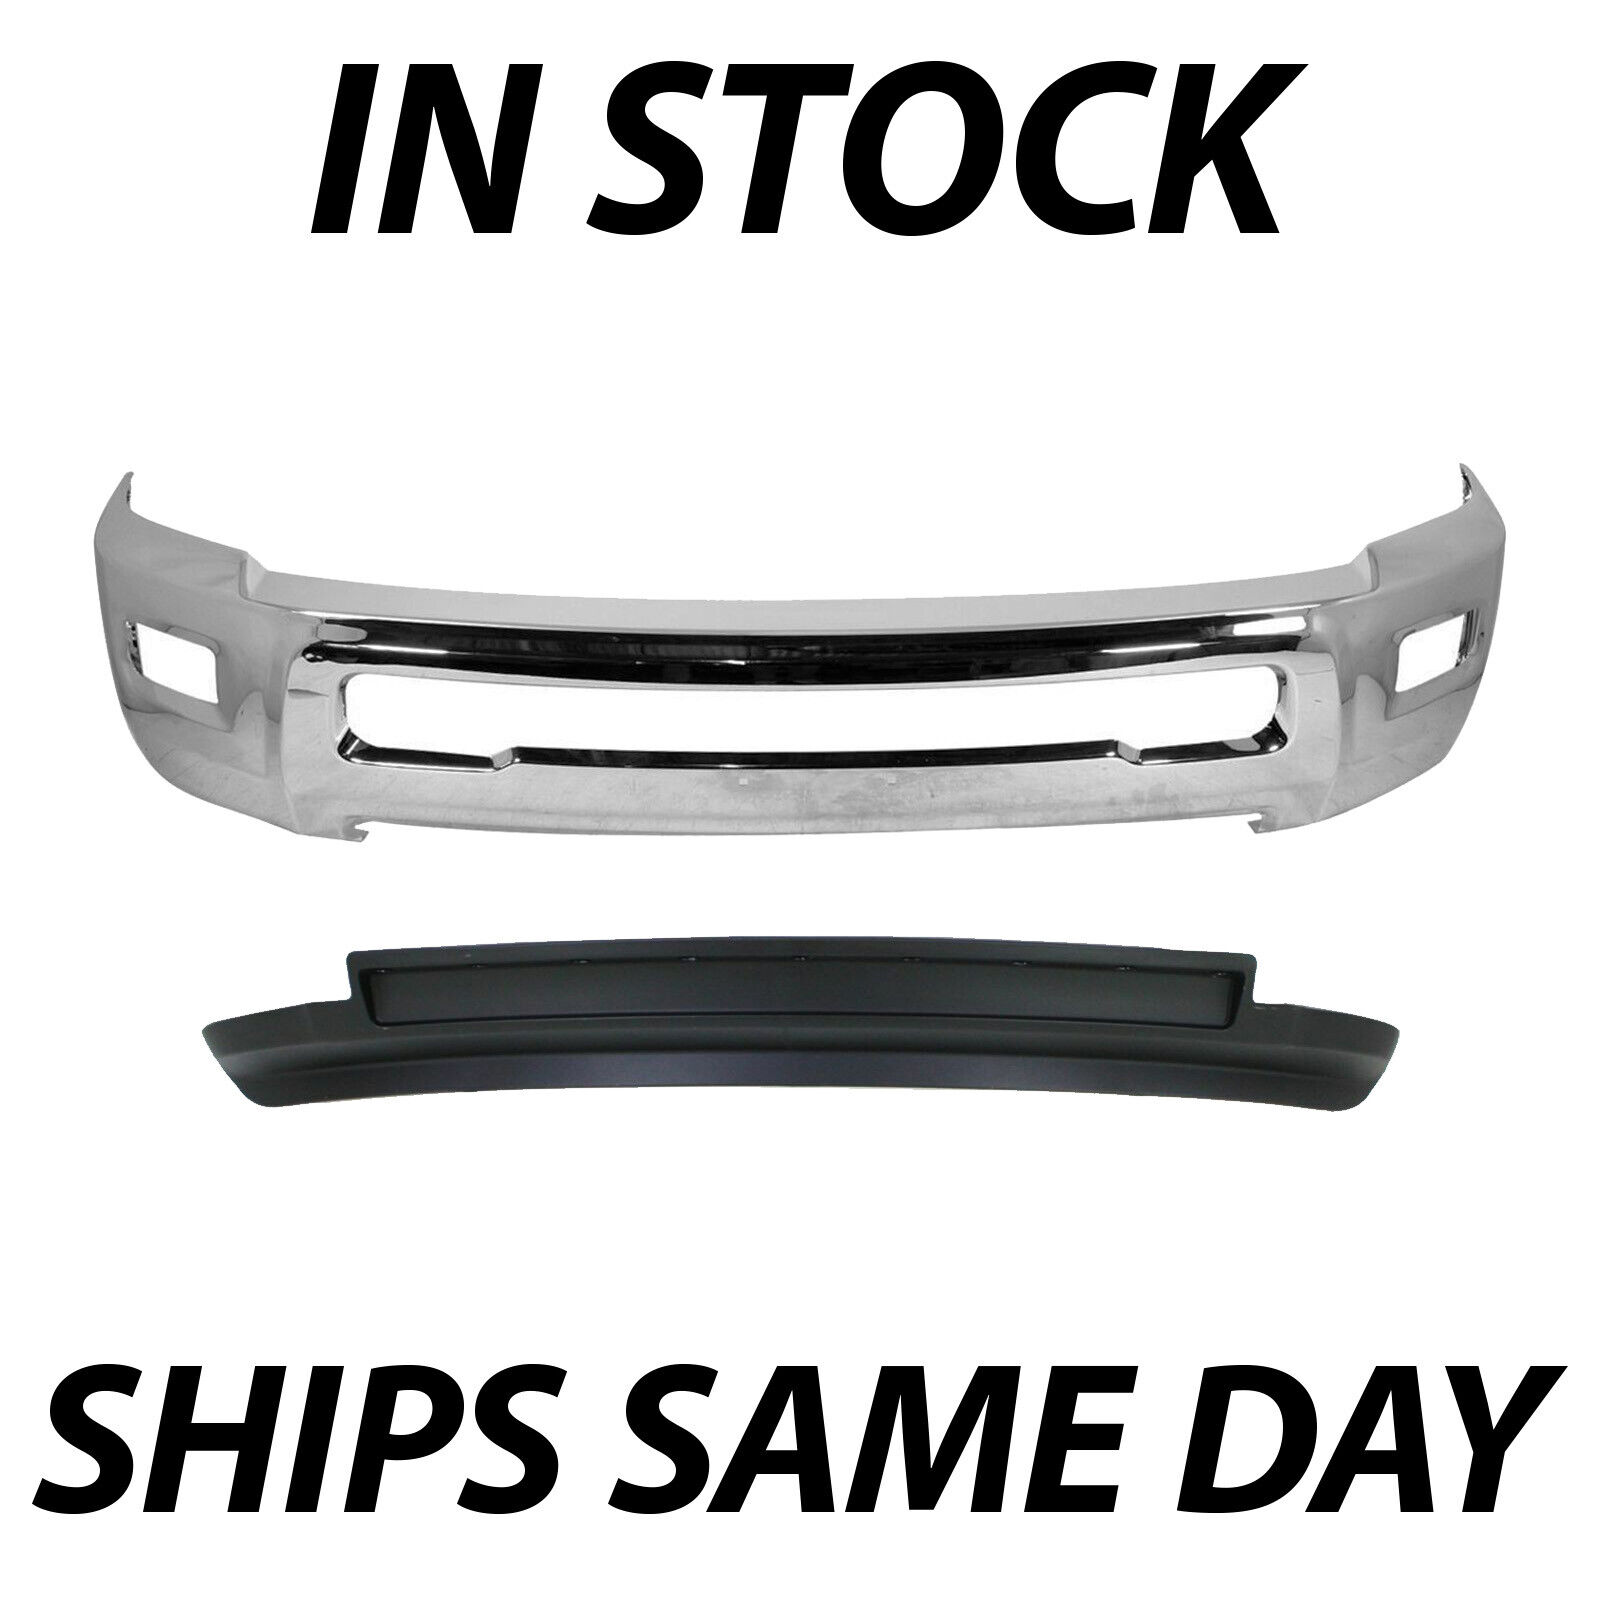 NEW Chrome Steel Front Bumper Air Dam Kit for 2010-2012 Dodge Ram 2500 3500 4WD